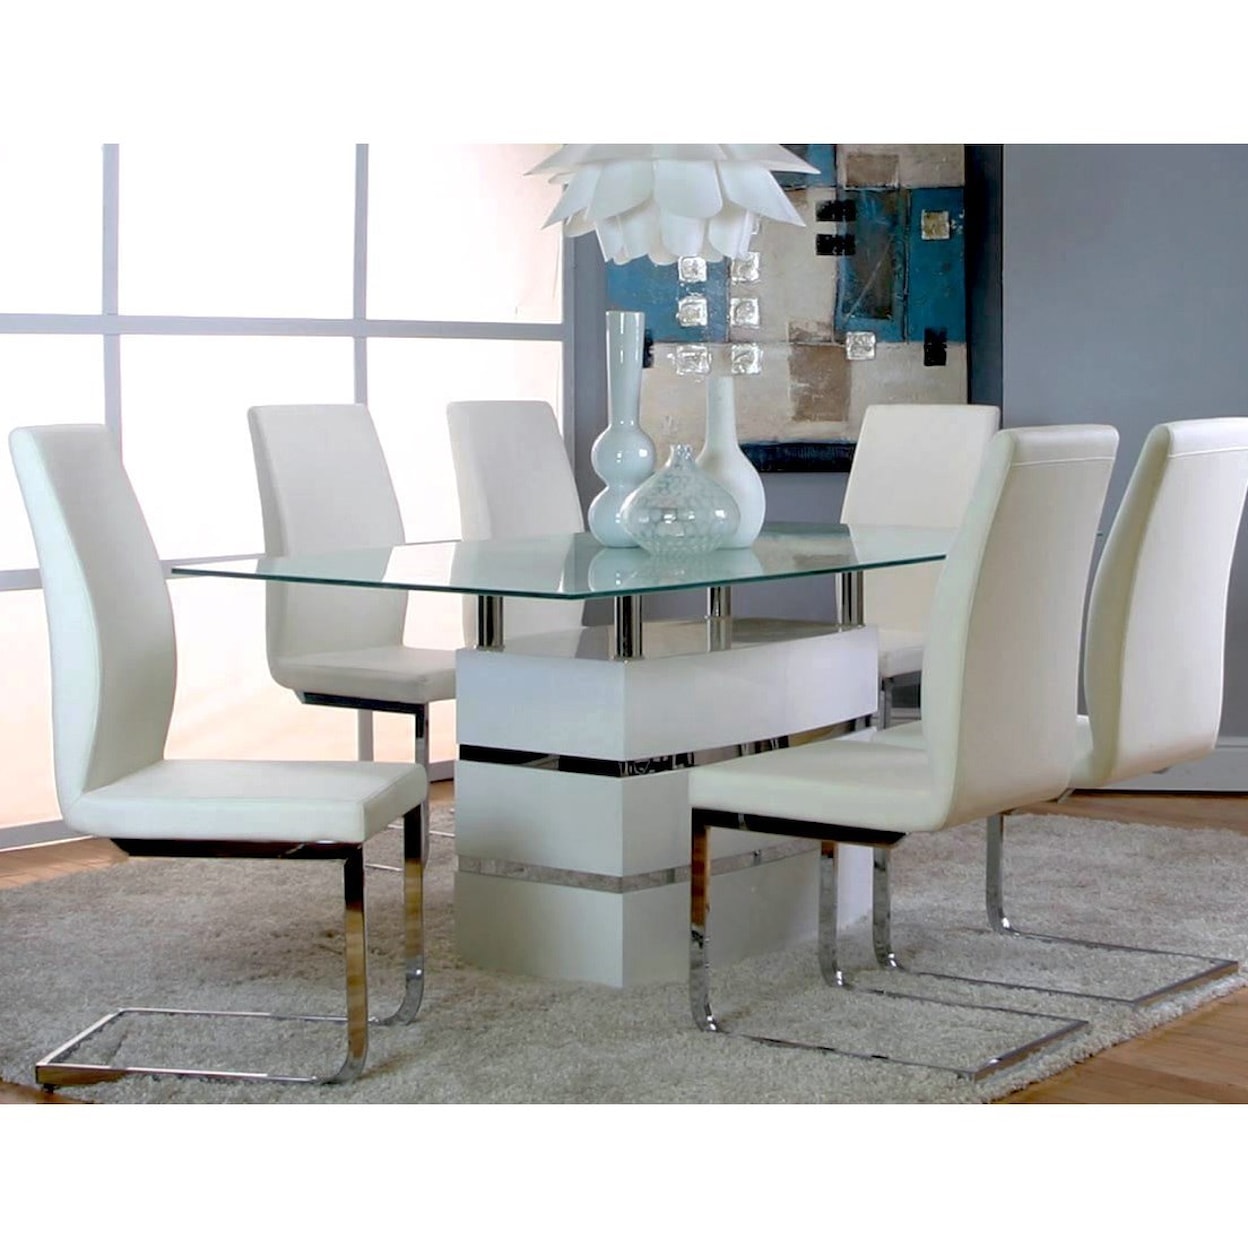 Cramco, Inc Altair 7-Piece Table and Chair Set